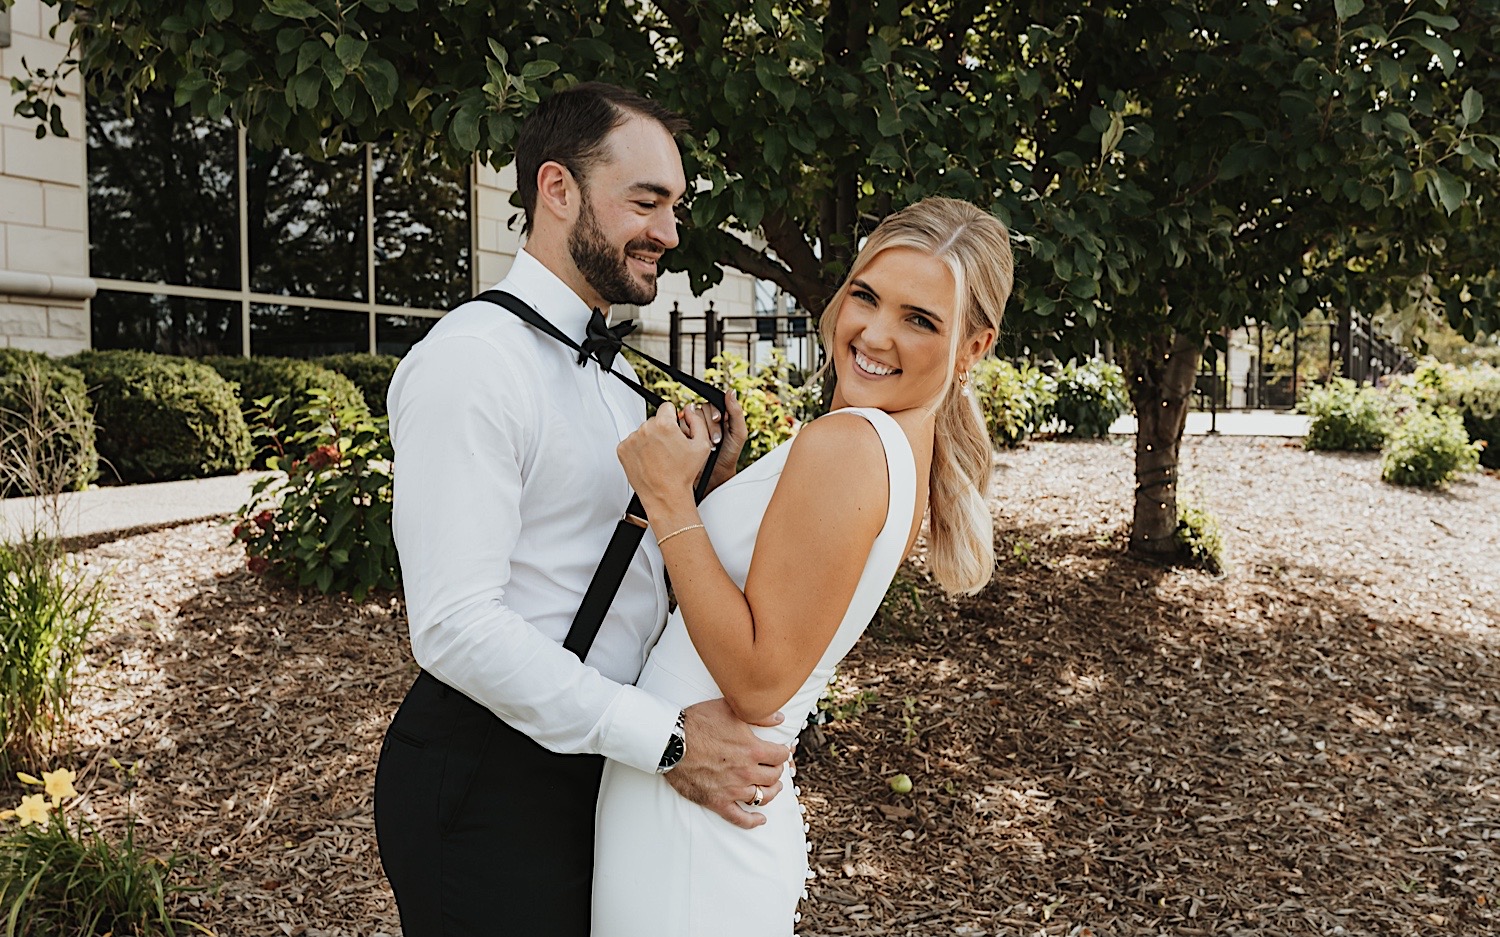 Portrait of a bride and groom, the bride is smiling at the camera and pulling on the groom's suspenders while he smiles at her